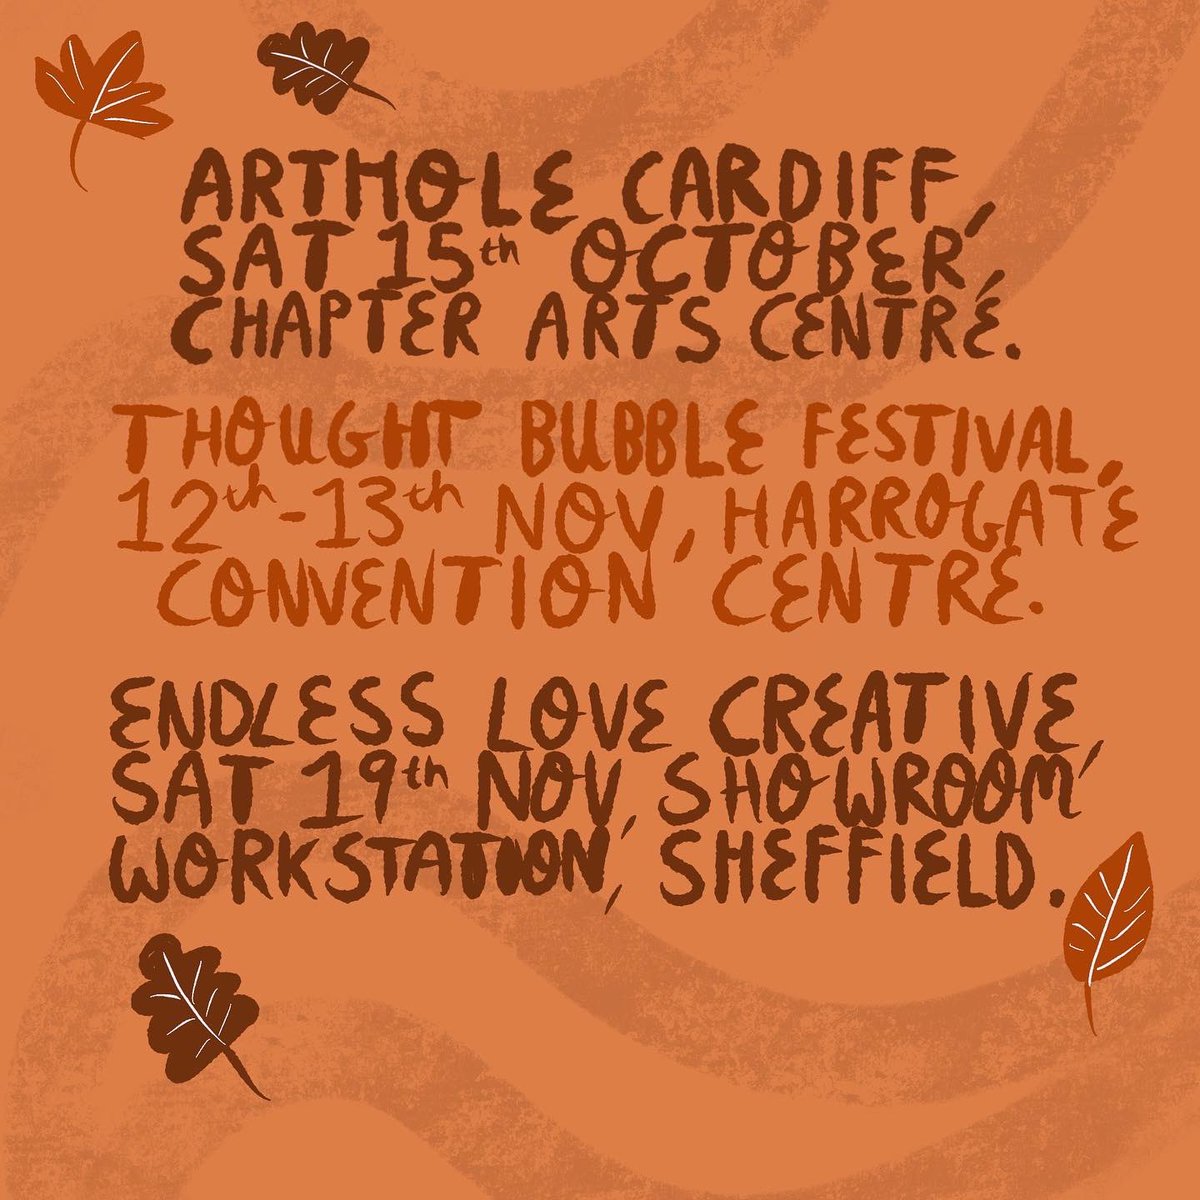 Going on tour!! 😜 here’s the IRL events you can catch me at this Autumn/Winter! 🍁🍂🎃 #thoughtbubble #tbf22 #endlesslovecreative #artholecardiff